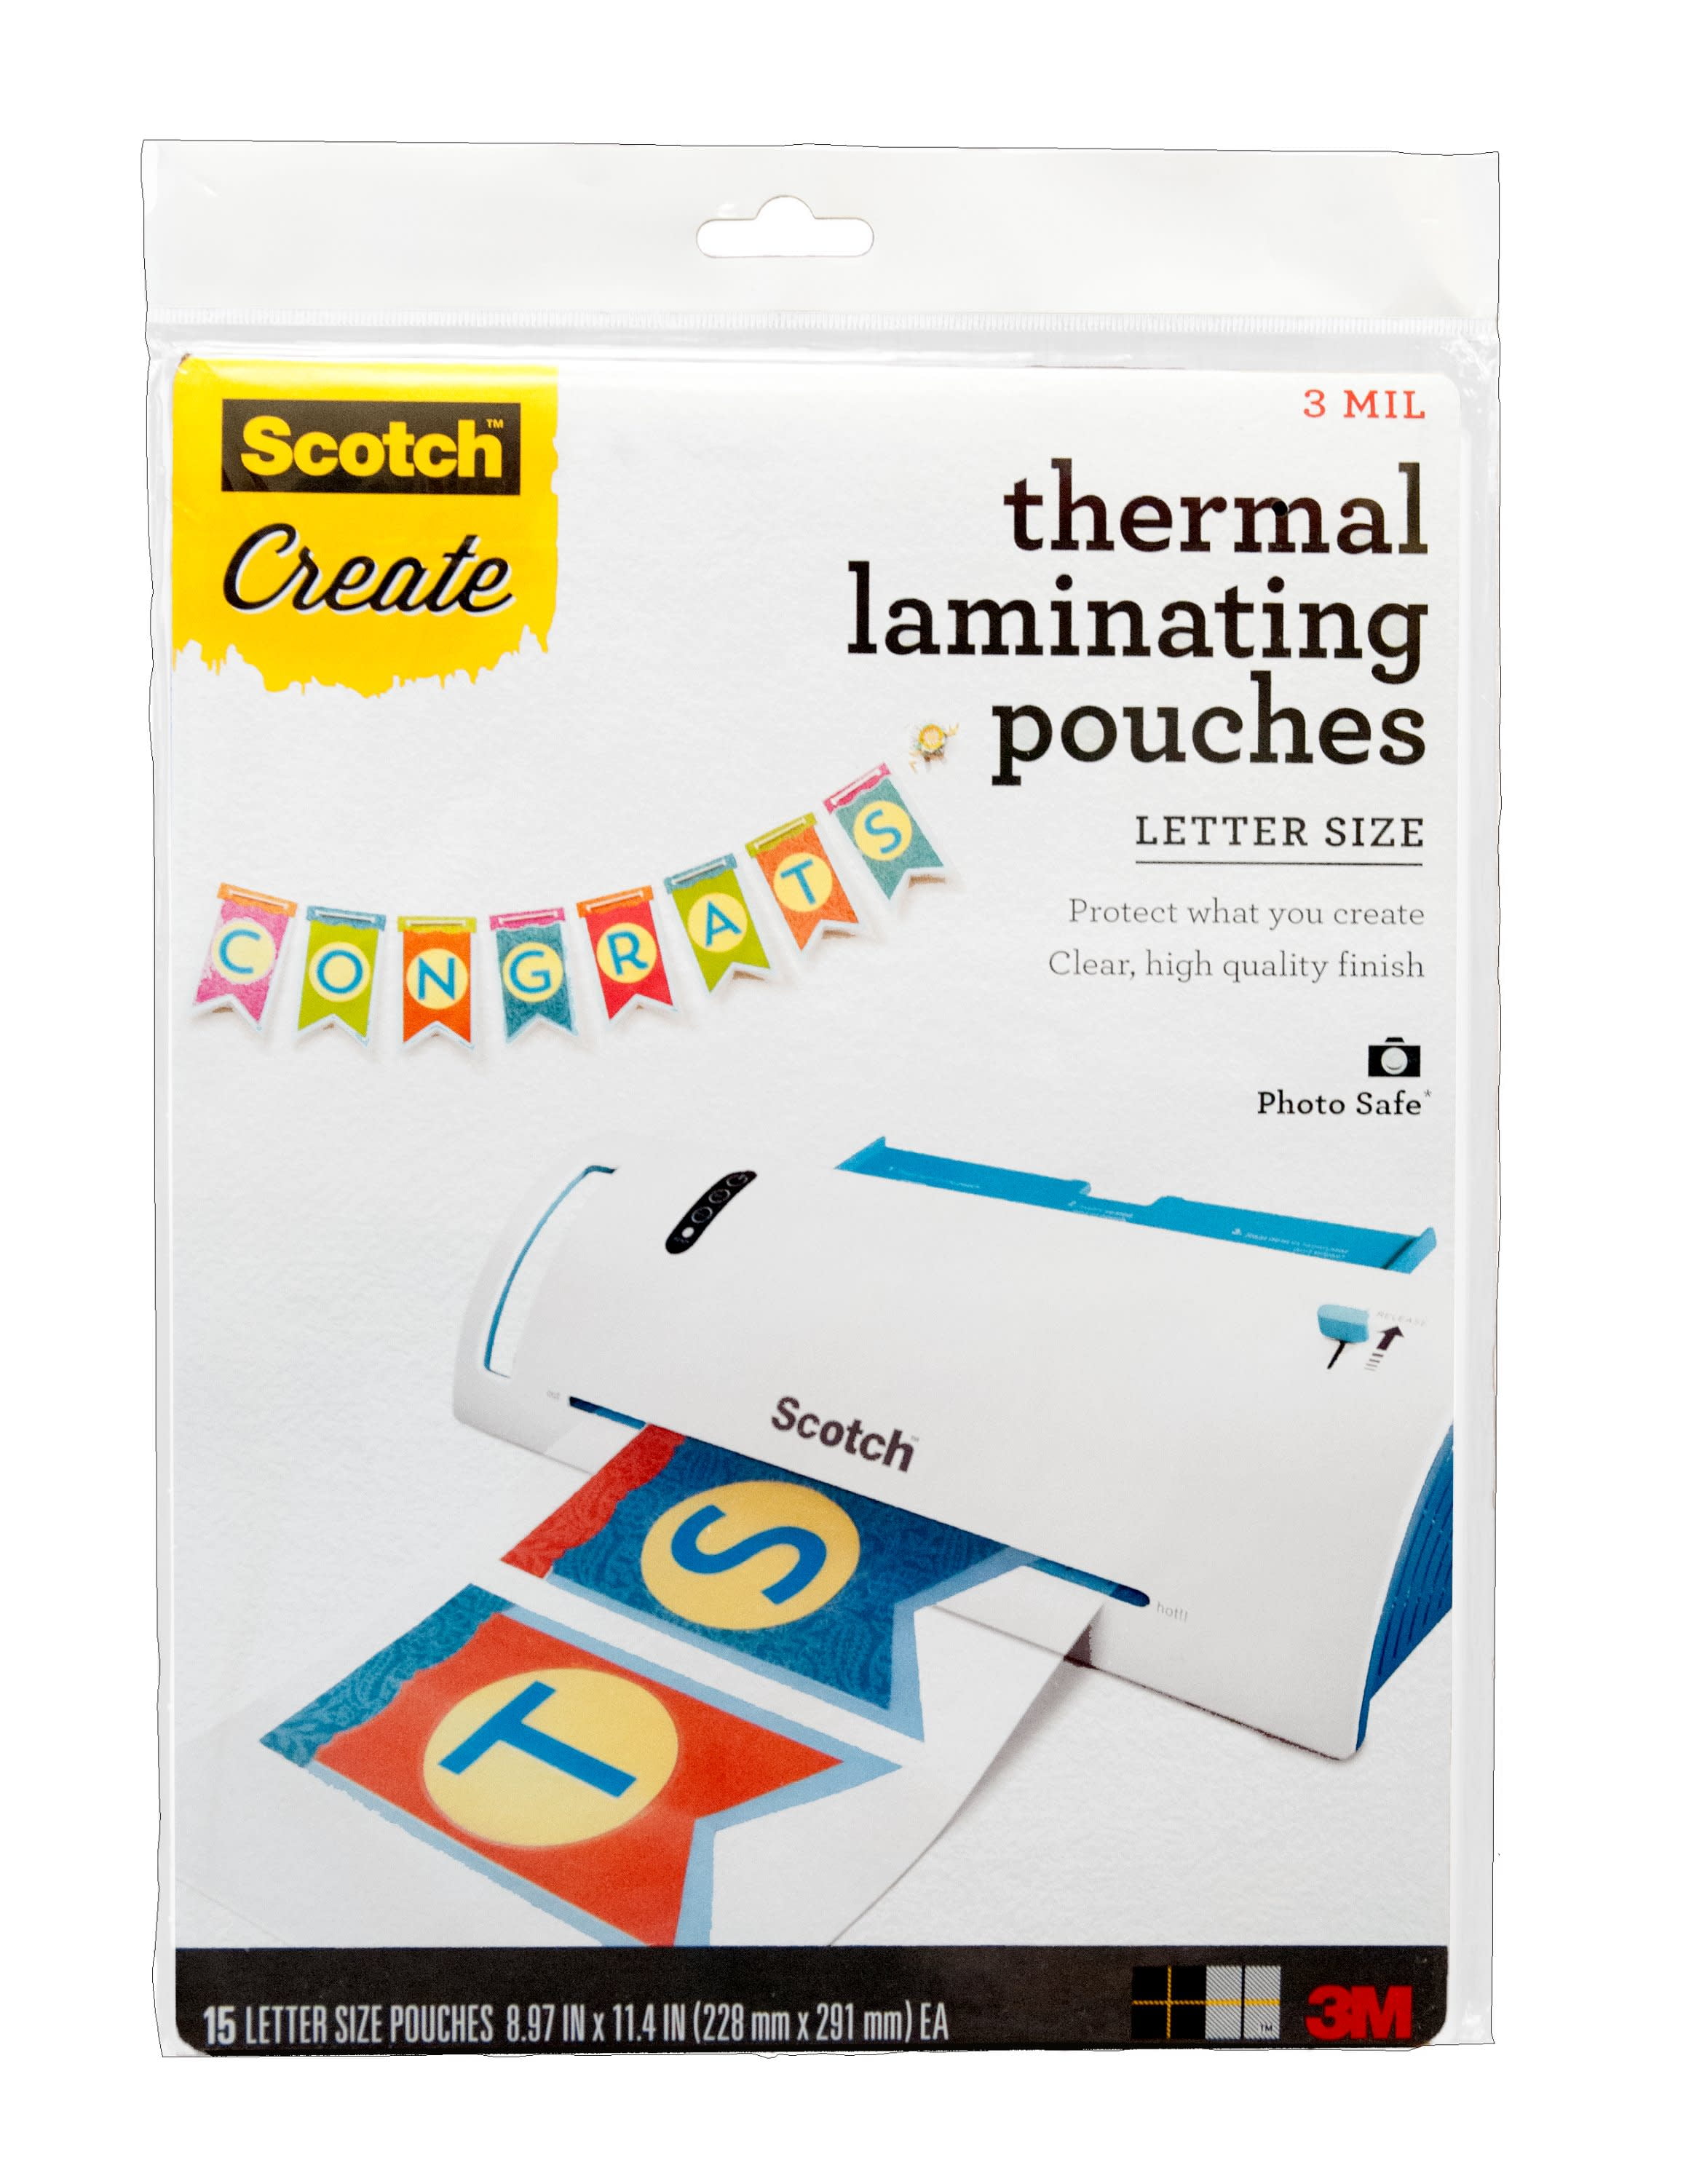 Does Walmart Laminate Documents & Cards? (Do This Instead…)